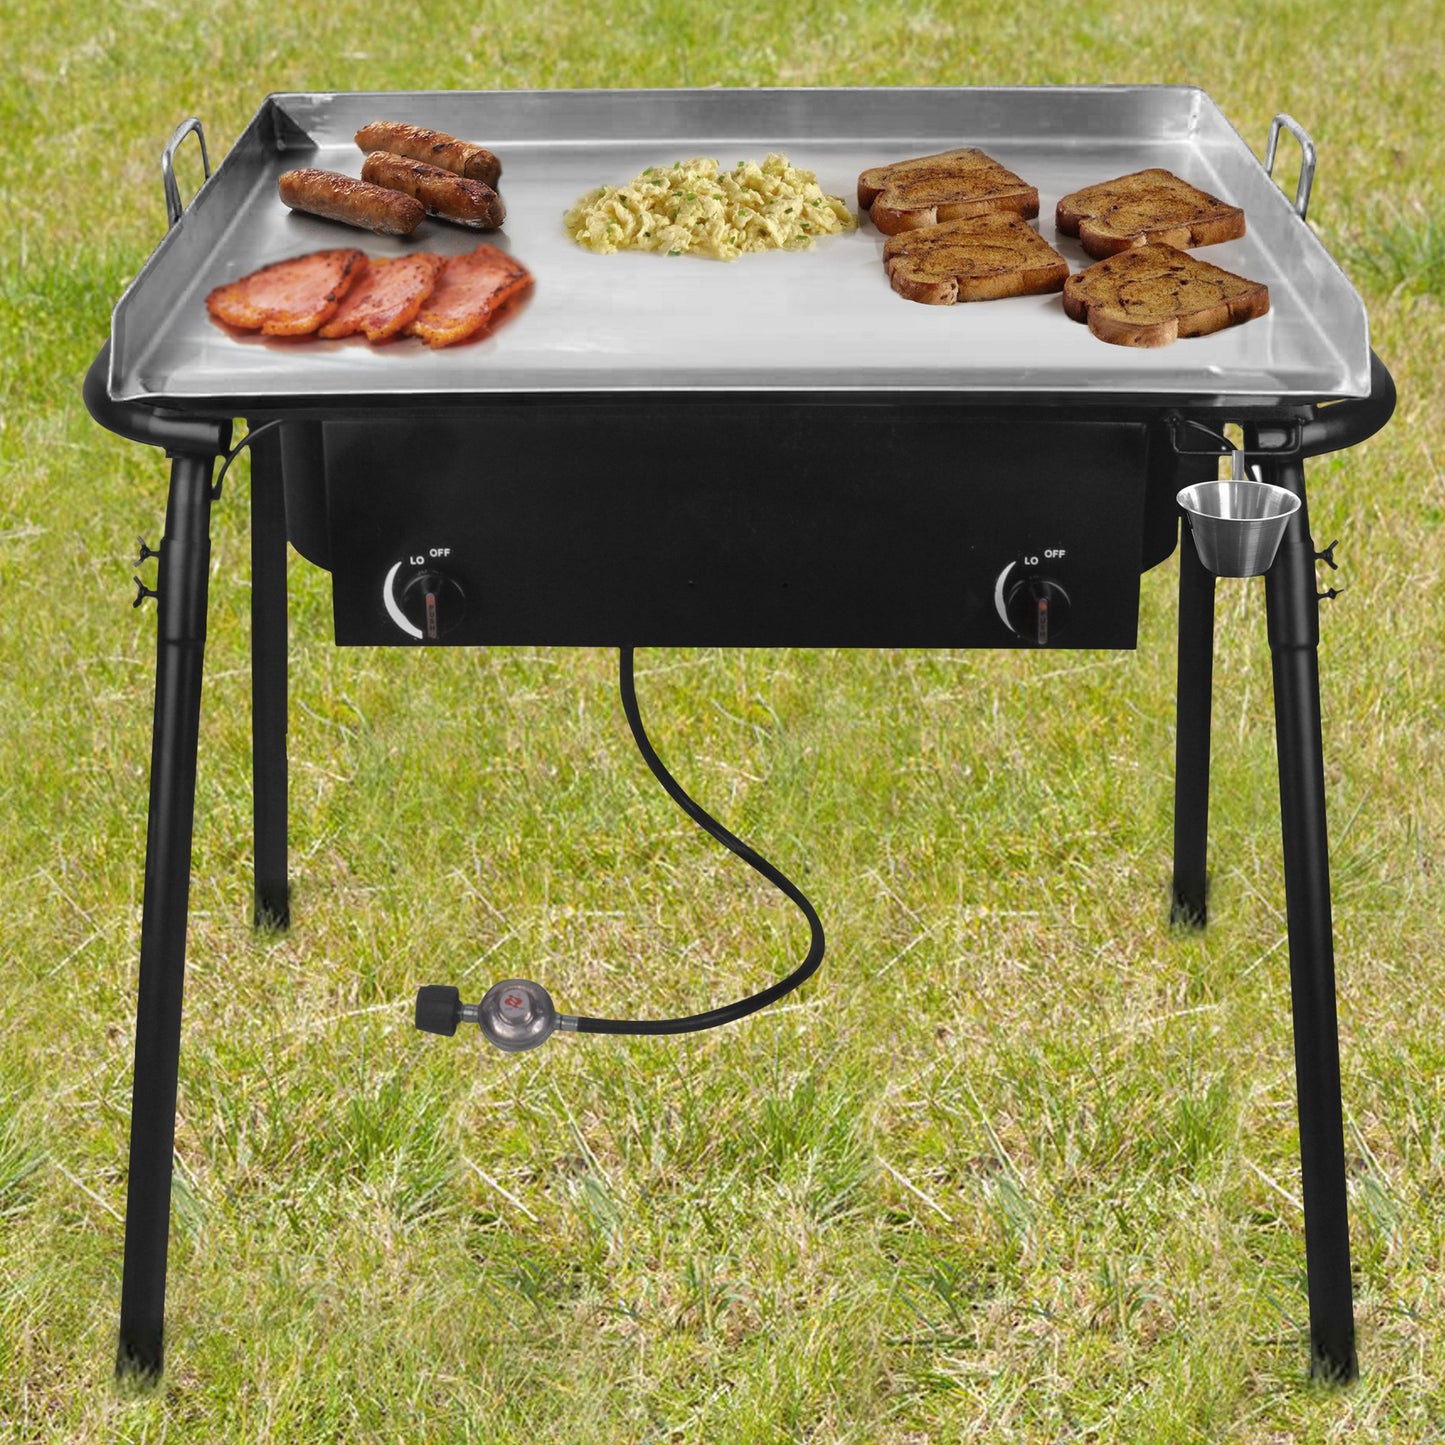 Barbour PS217 Patio Stove with Griddle Tapper, 2-Burner